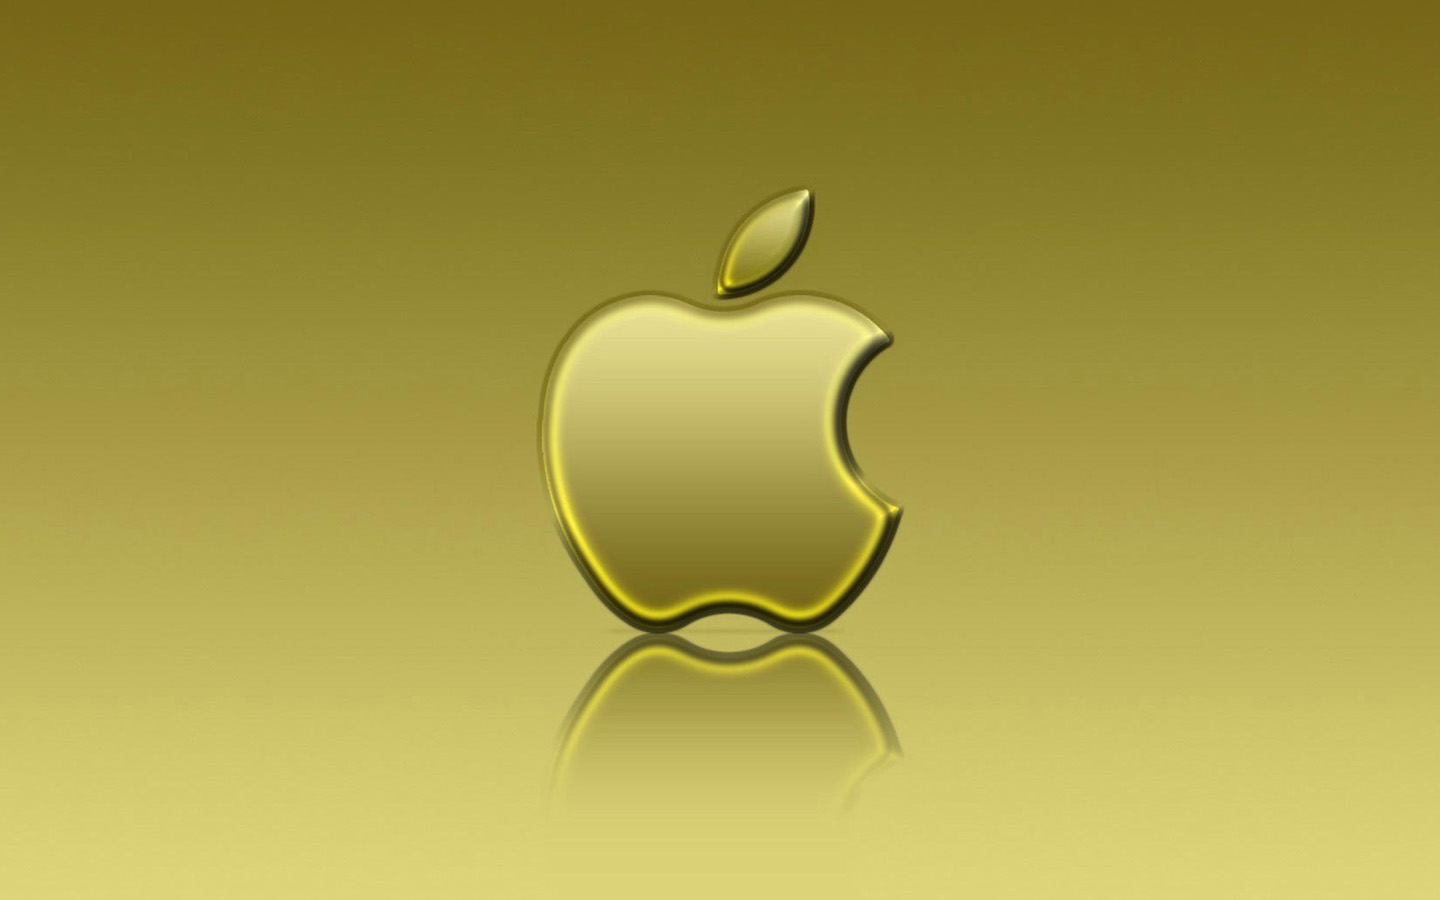 Apple Iphone Wallpapers Hd Group - Gold And Black Apple - HD Wallpaper 